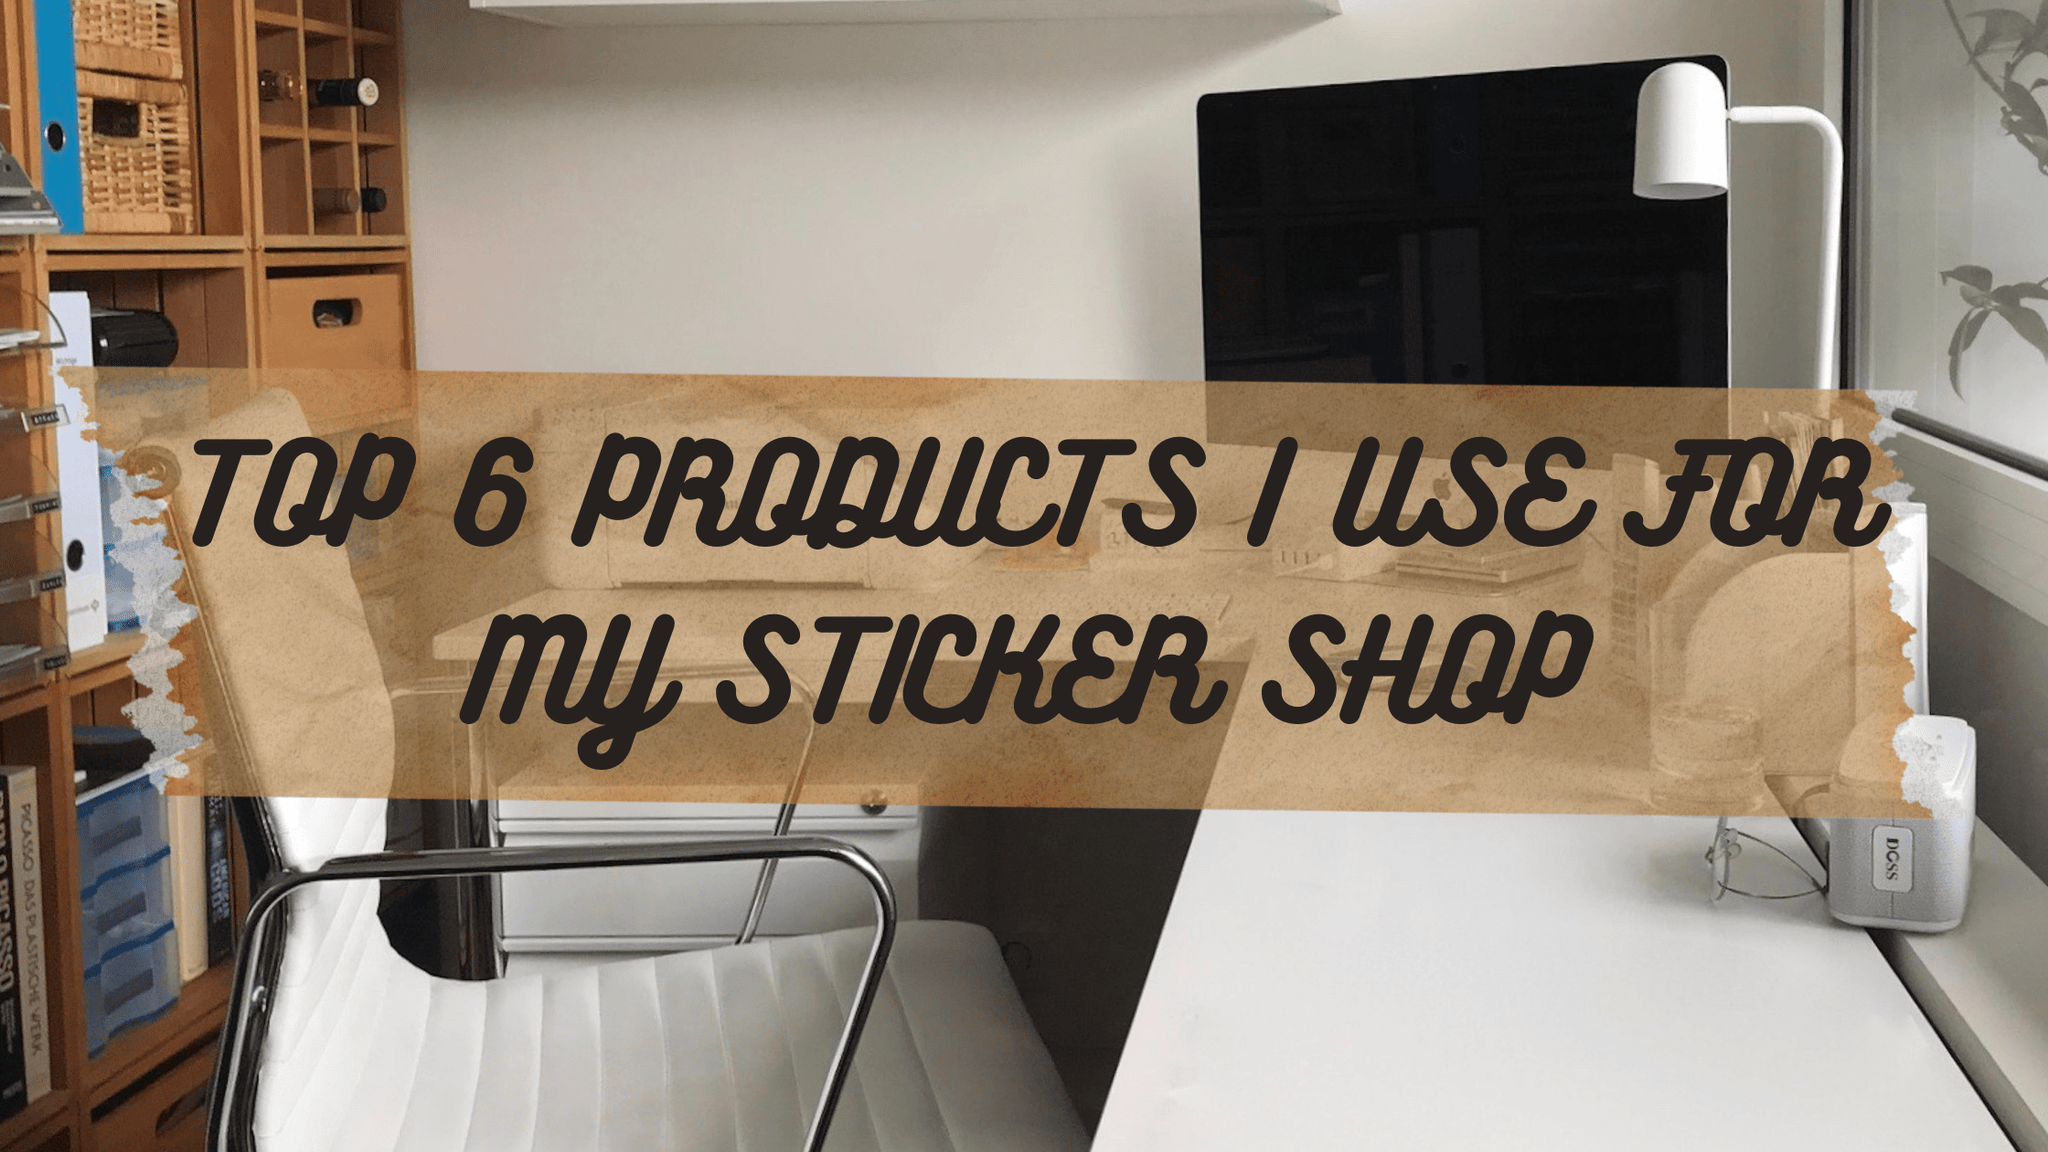 Top 8 Products I Use for my Small Sticker Shop